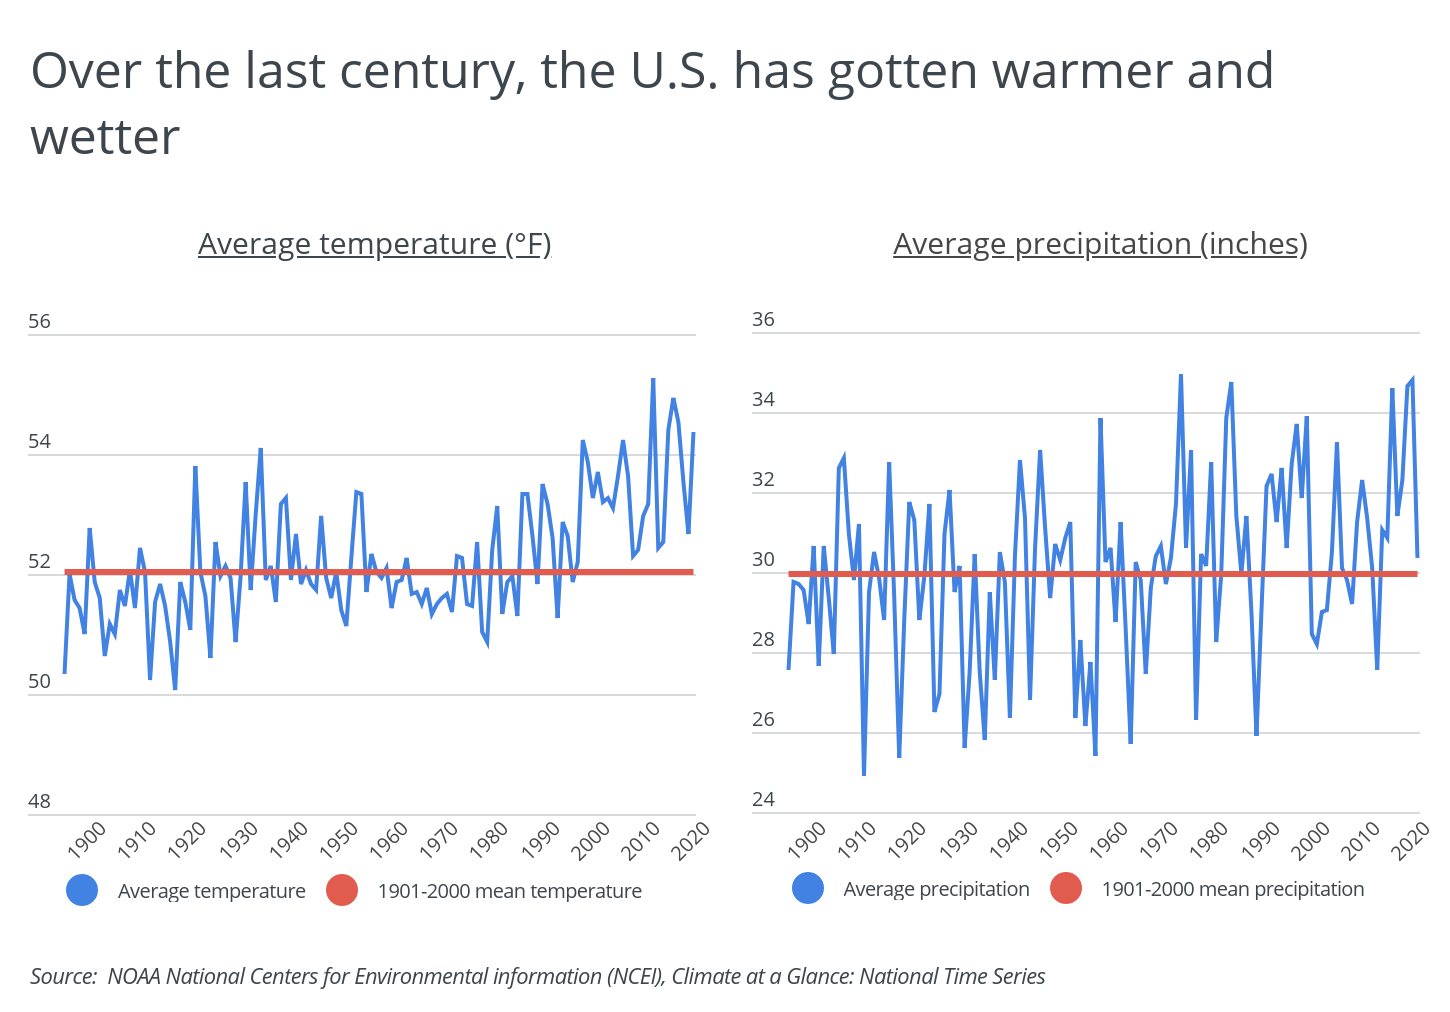 Over the last century, the U.S. has gotten warmer and wetter